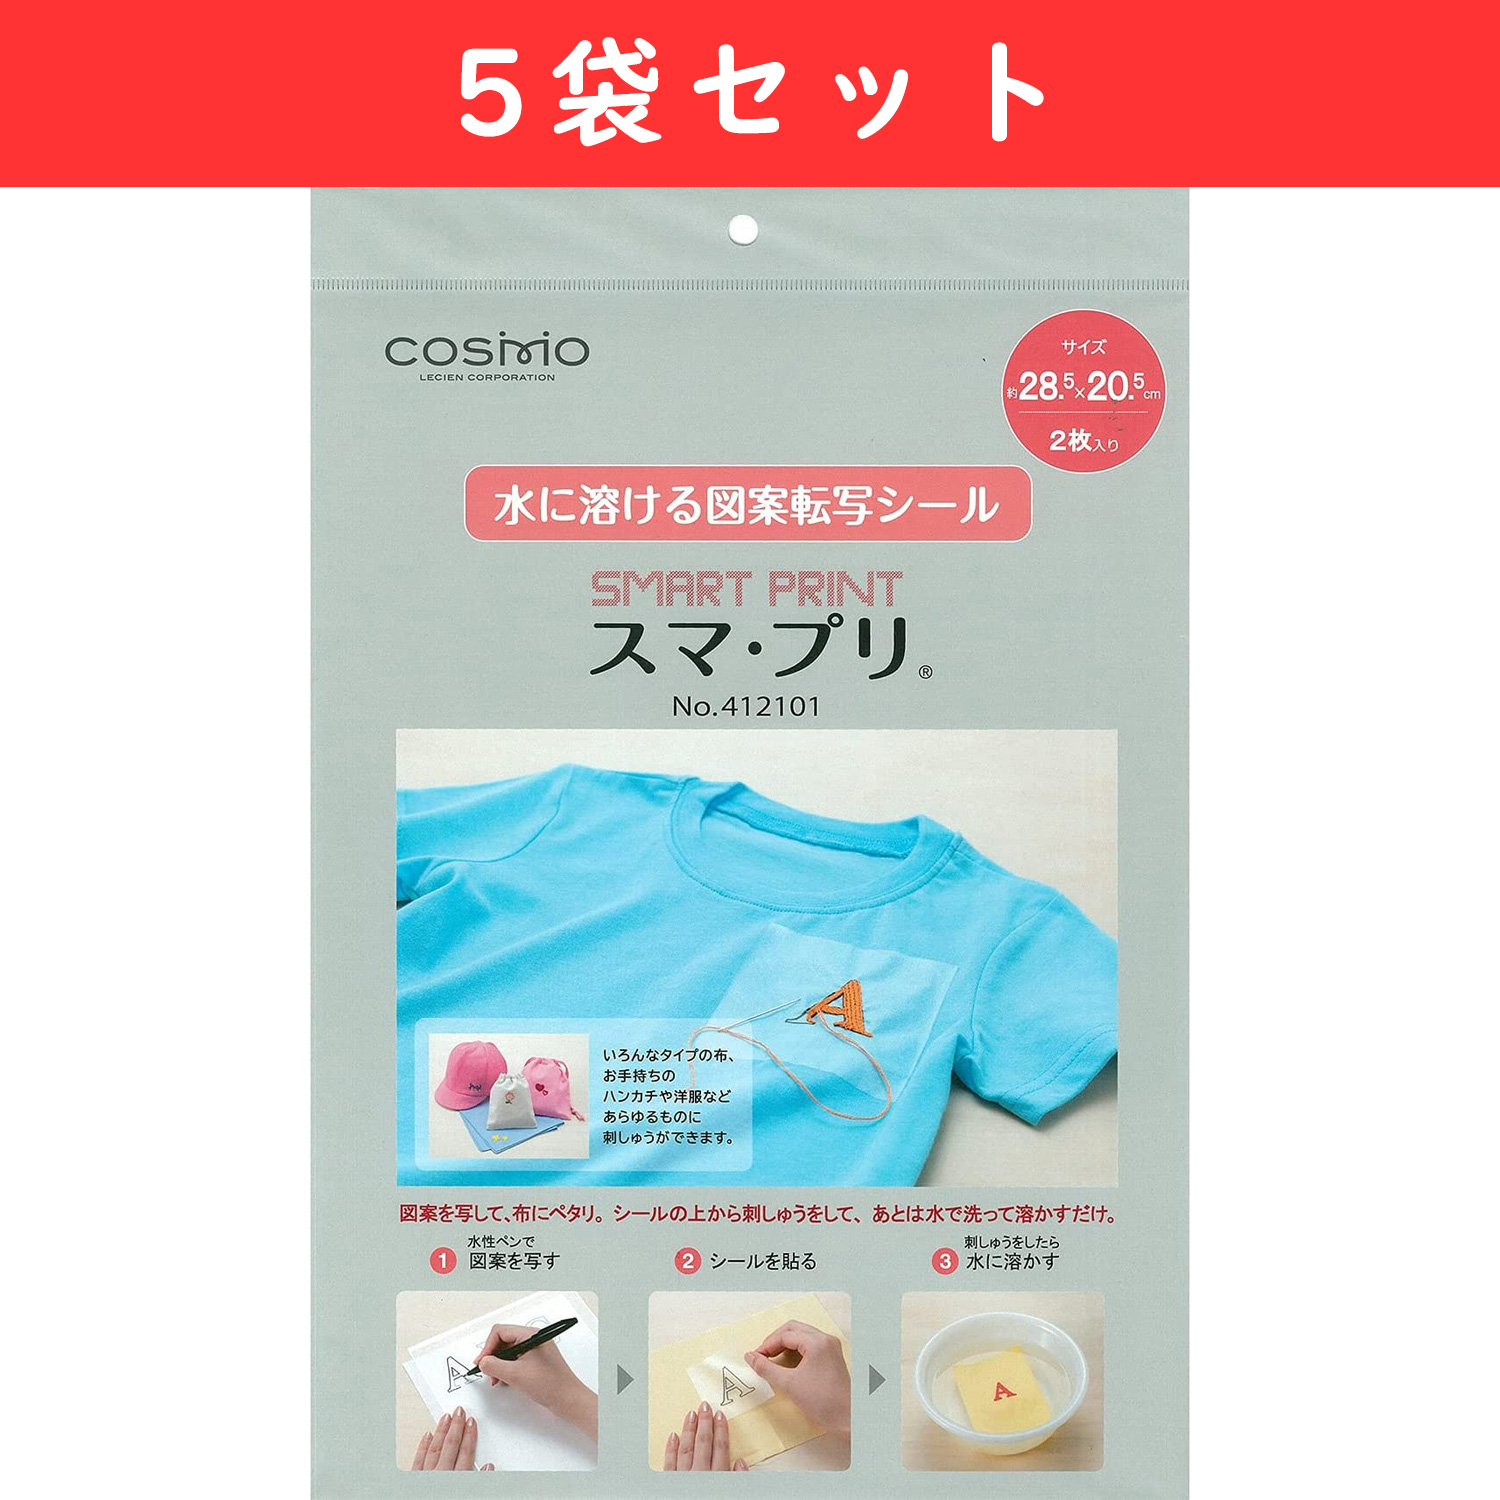 COT412101-5 Design transfer stickers that dissolve in water "Suma-puri" A4 size 2 sheets"", 5 bag set (set)